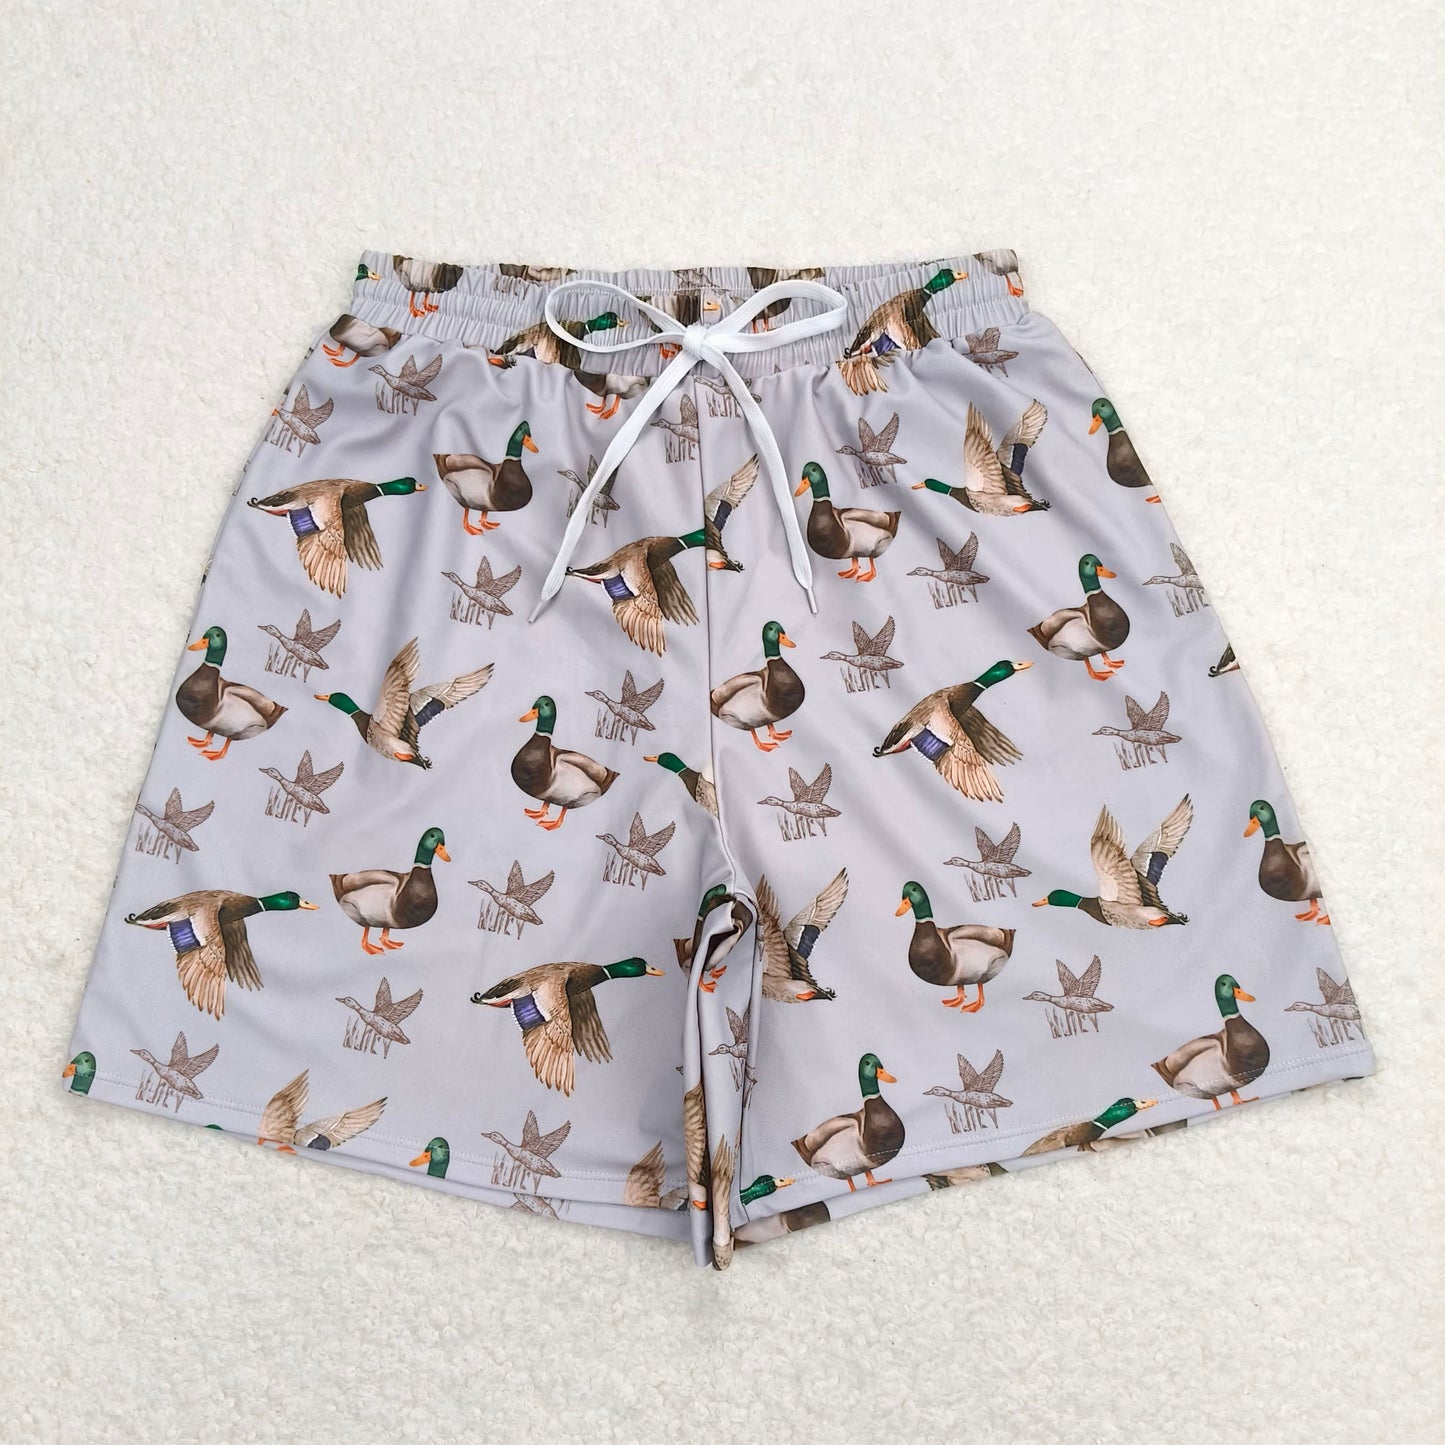 S0268 Duck Grey Brown Swim Trunks RTS  	 S0429 Adult male duck grey brown swimming trunks